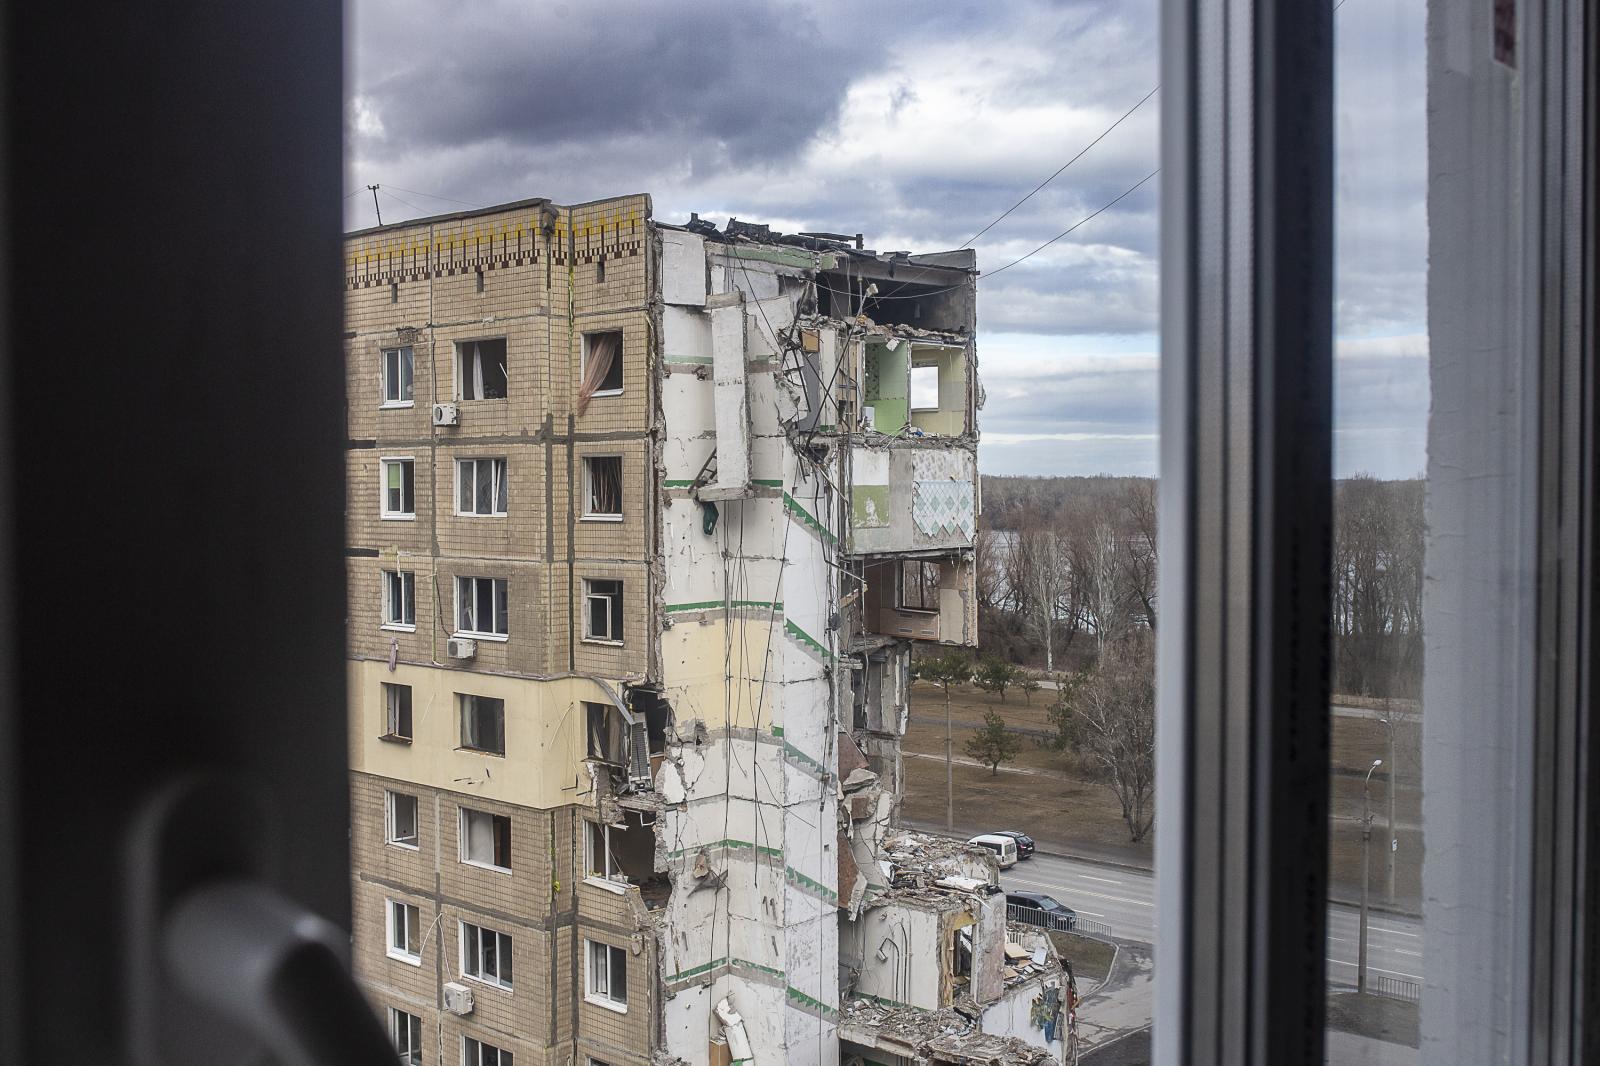 Echoes of destiny: a missile's whisper in Dnipro - DNIPRO, UKRAINE - 21 FEBRUARY: Windows of Katerina's...